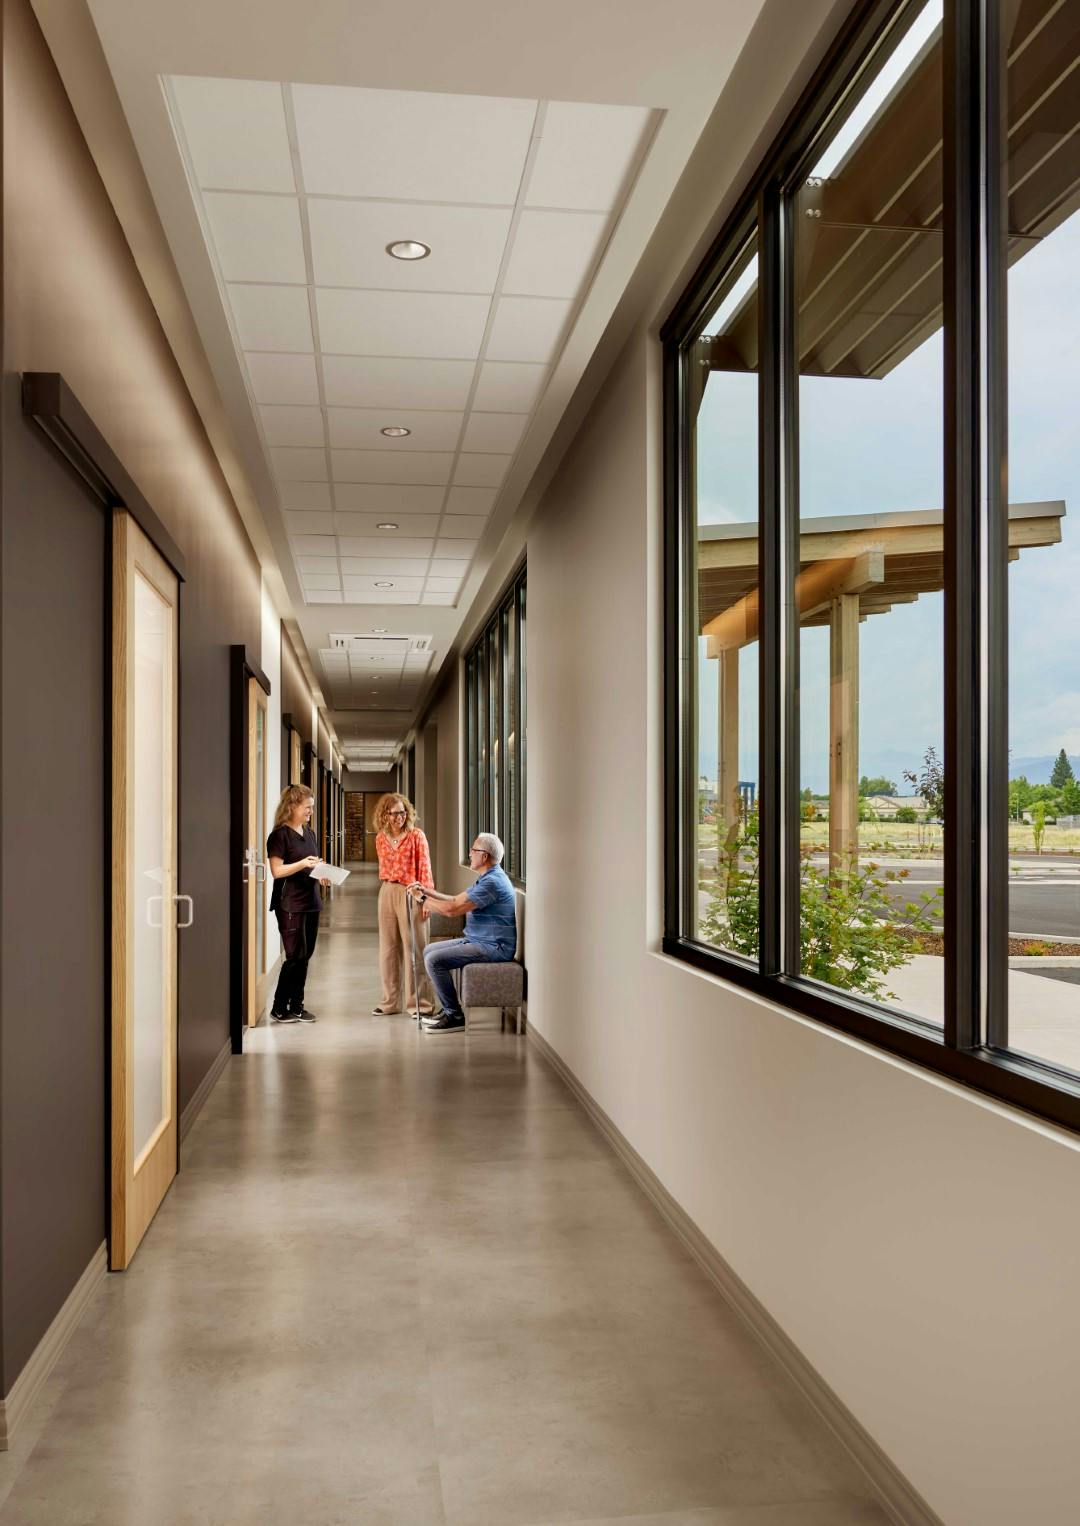 The outer corridor of the OOC ambulatory surgery center. A patient and their family member are talking to a nurse. The hallway is very well lit due to the natural lighting of the large windows.